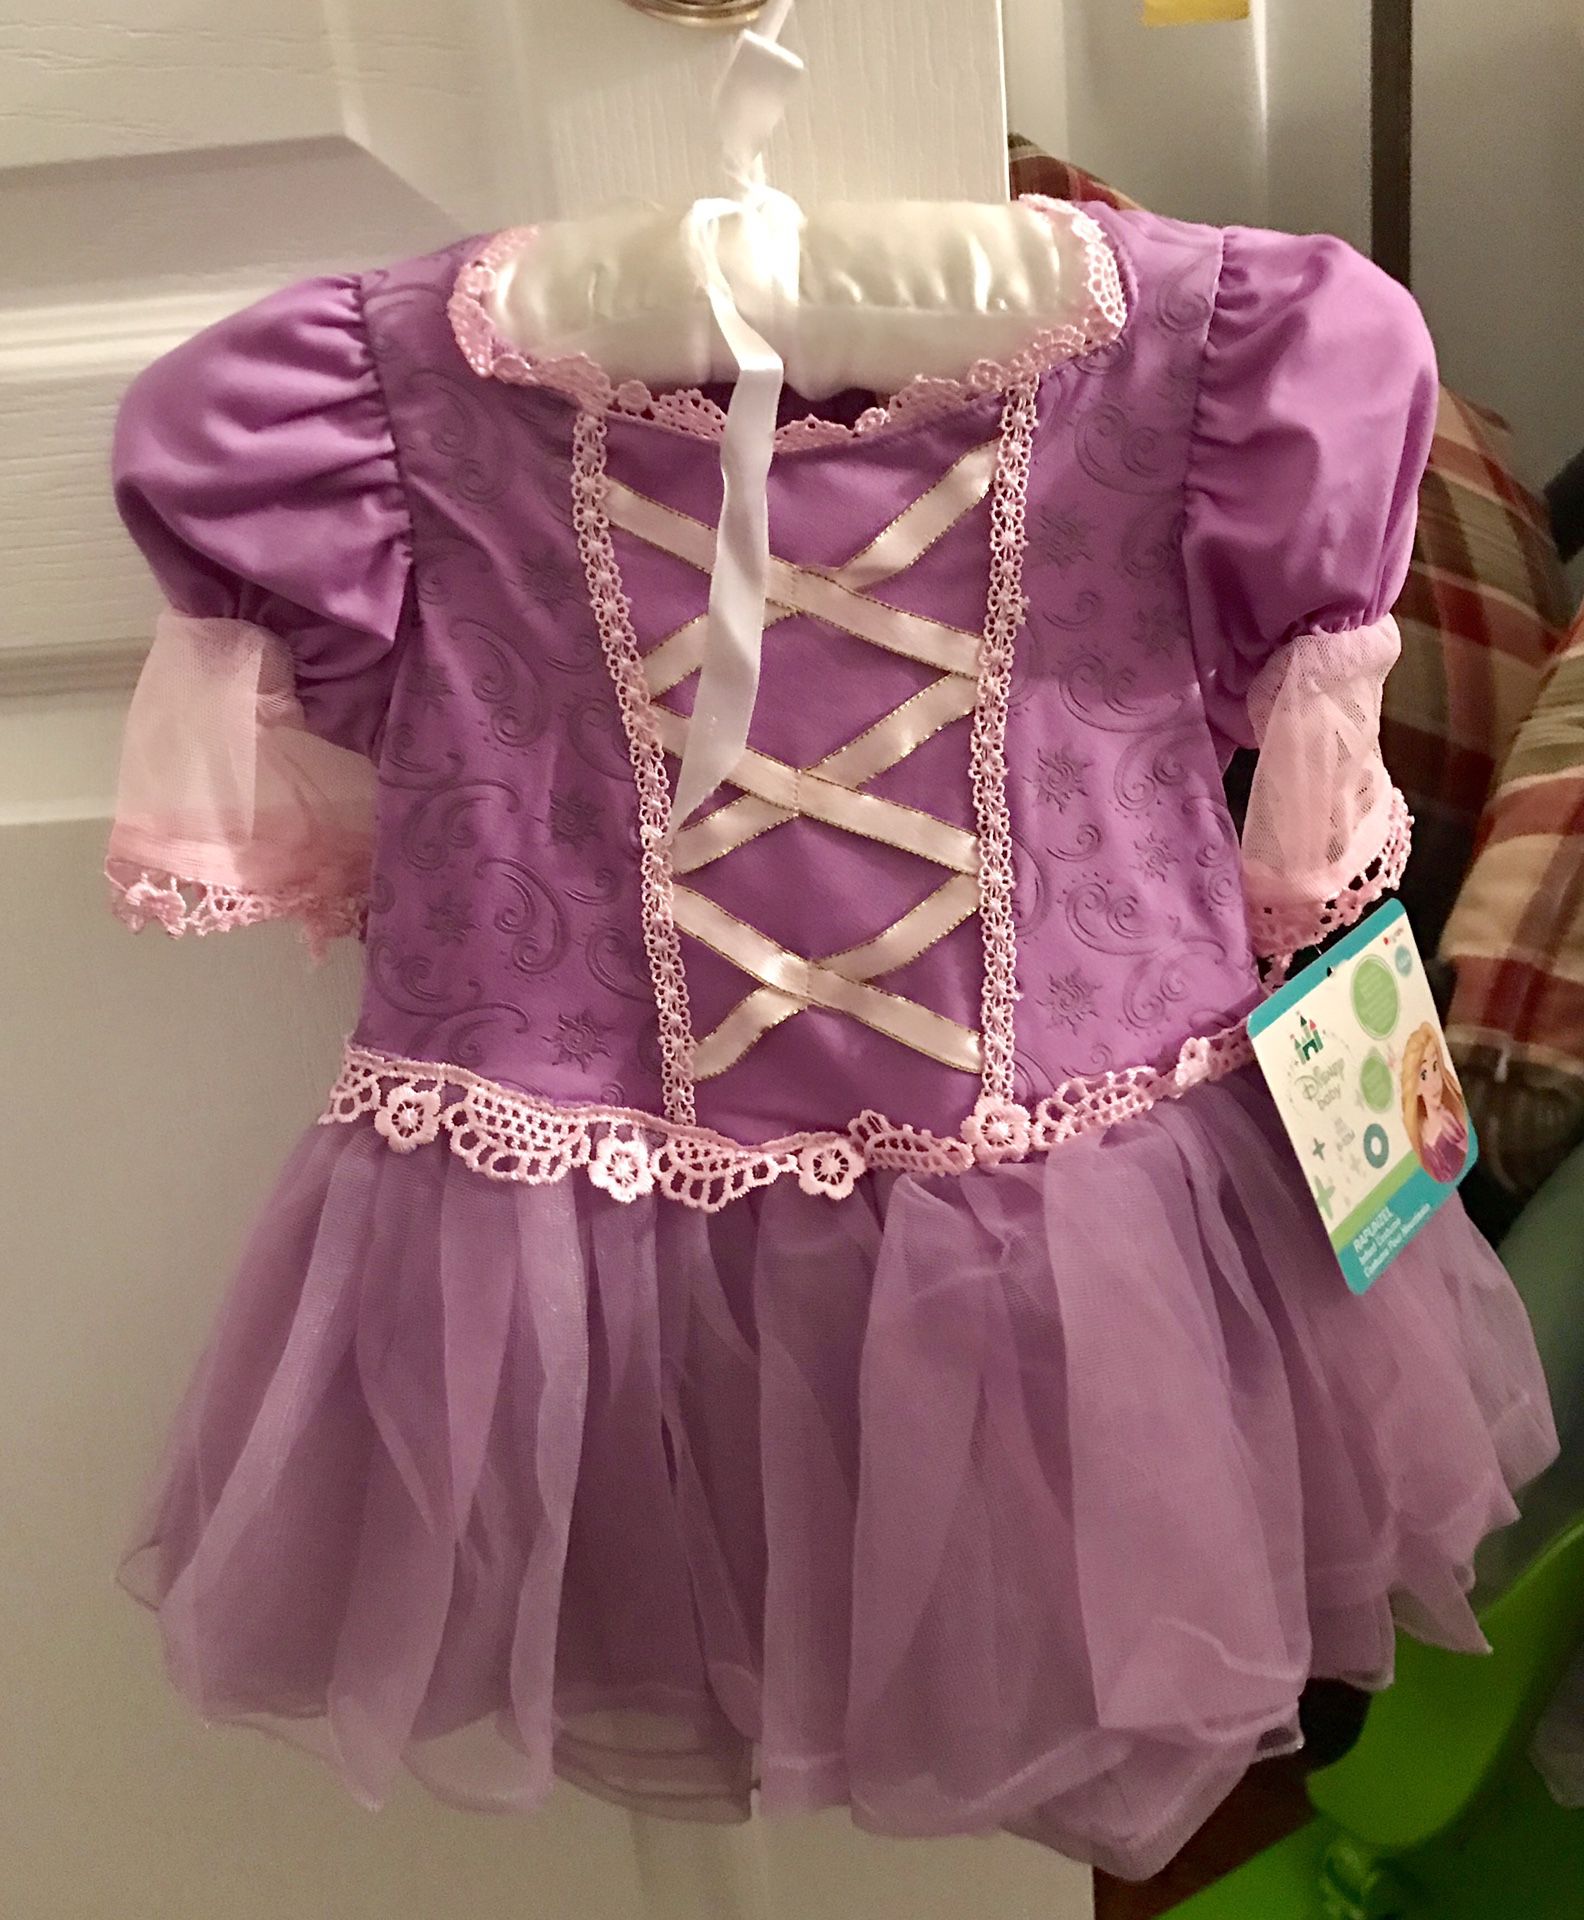 NEW with tag, RAPUNZEL dress w/headband & snap closure crotch for diaper change. Size 6M+